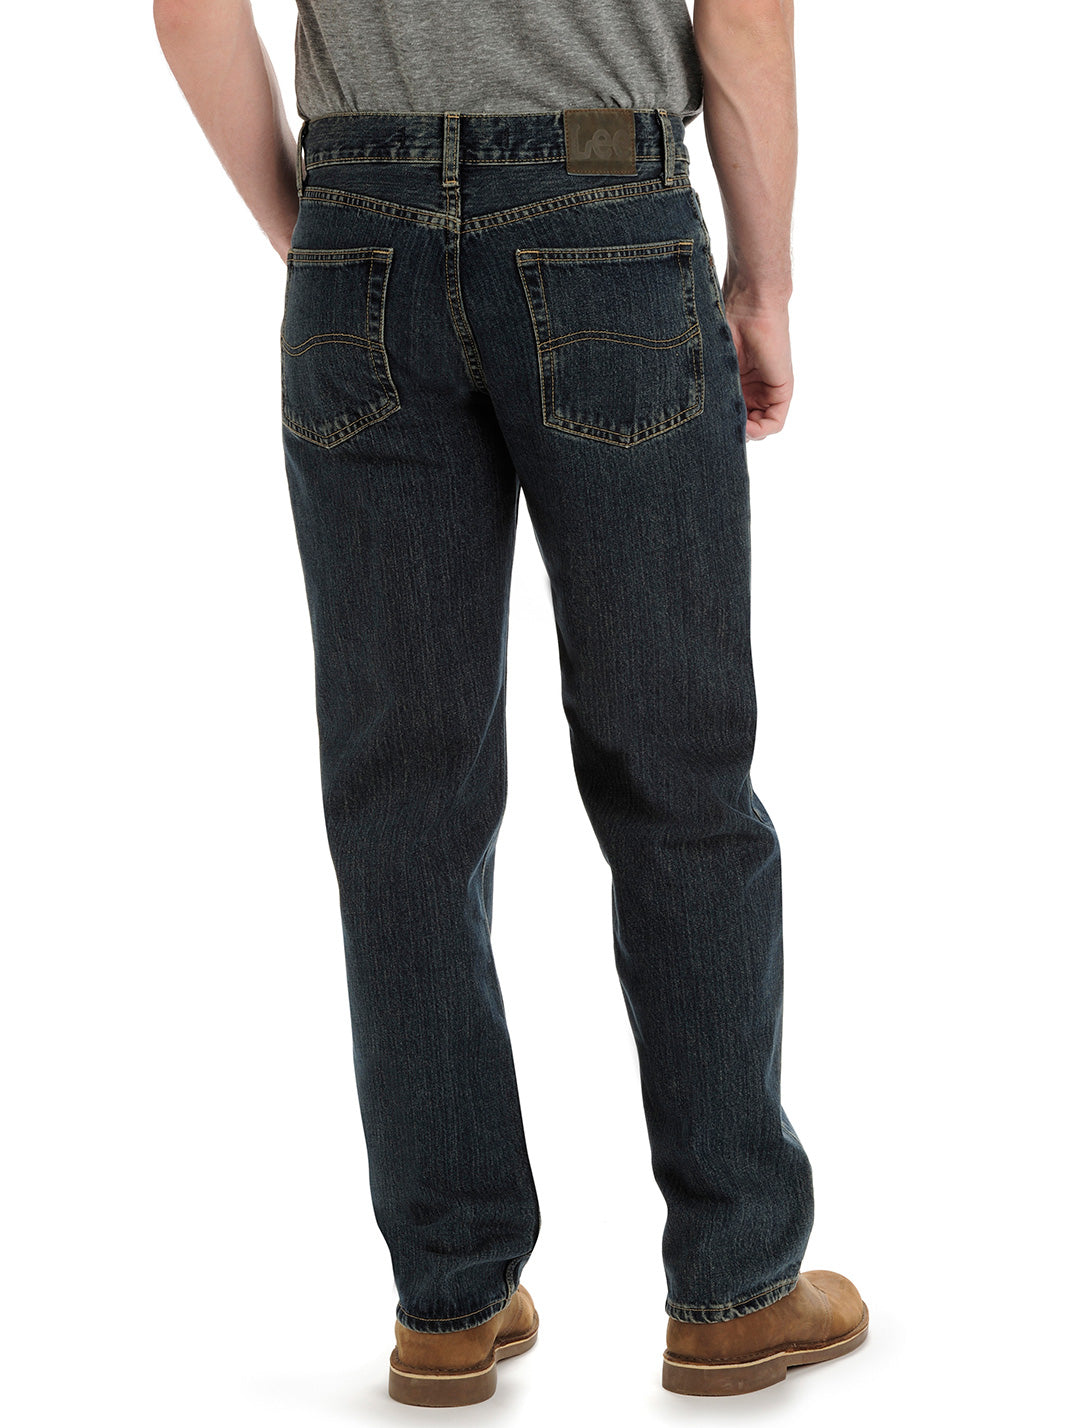 Men's Relaxed Fit Straight Leg Jeans - Tomas